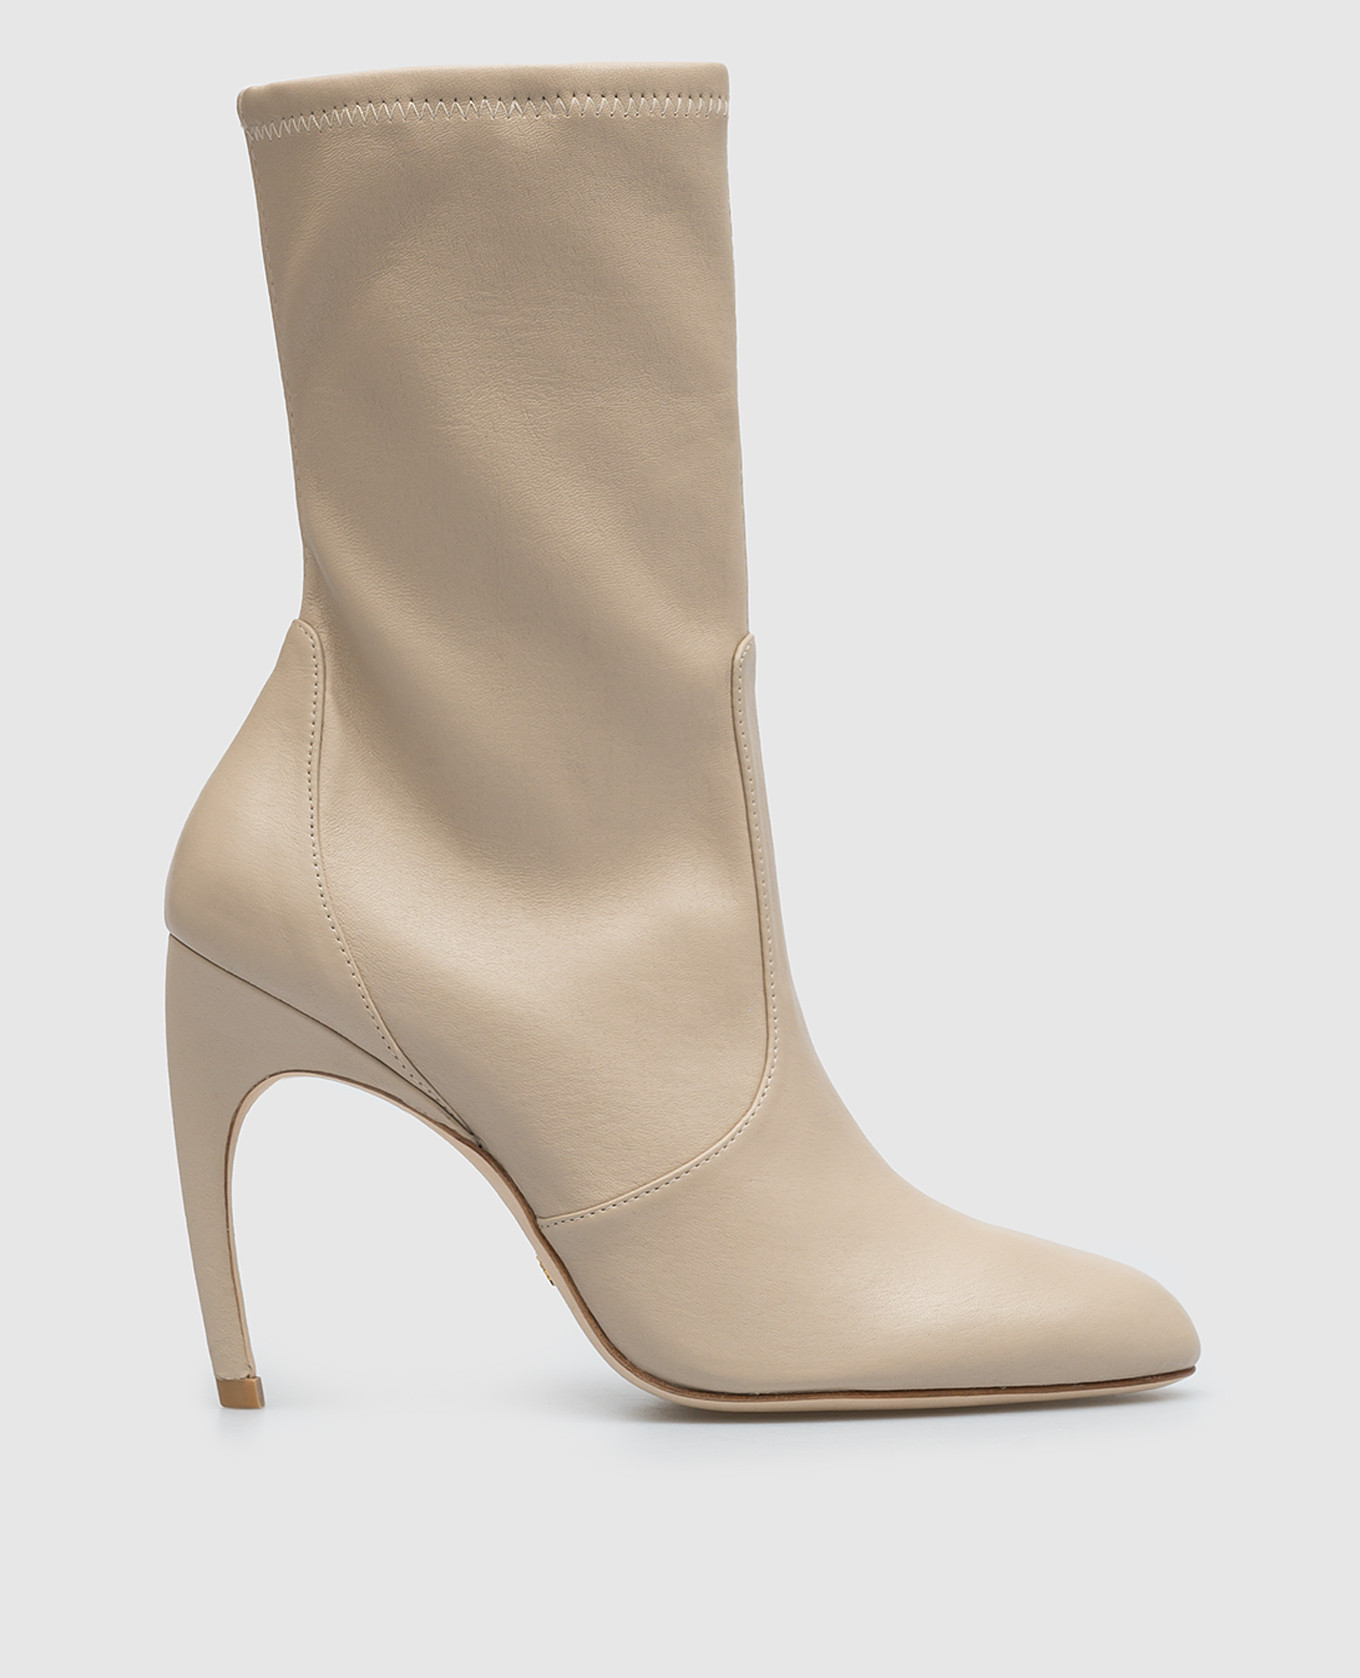 Lxecrve Beige Leather Ankle Boots